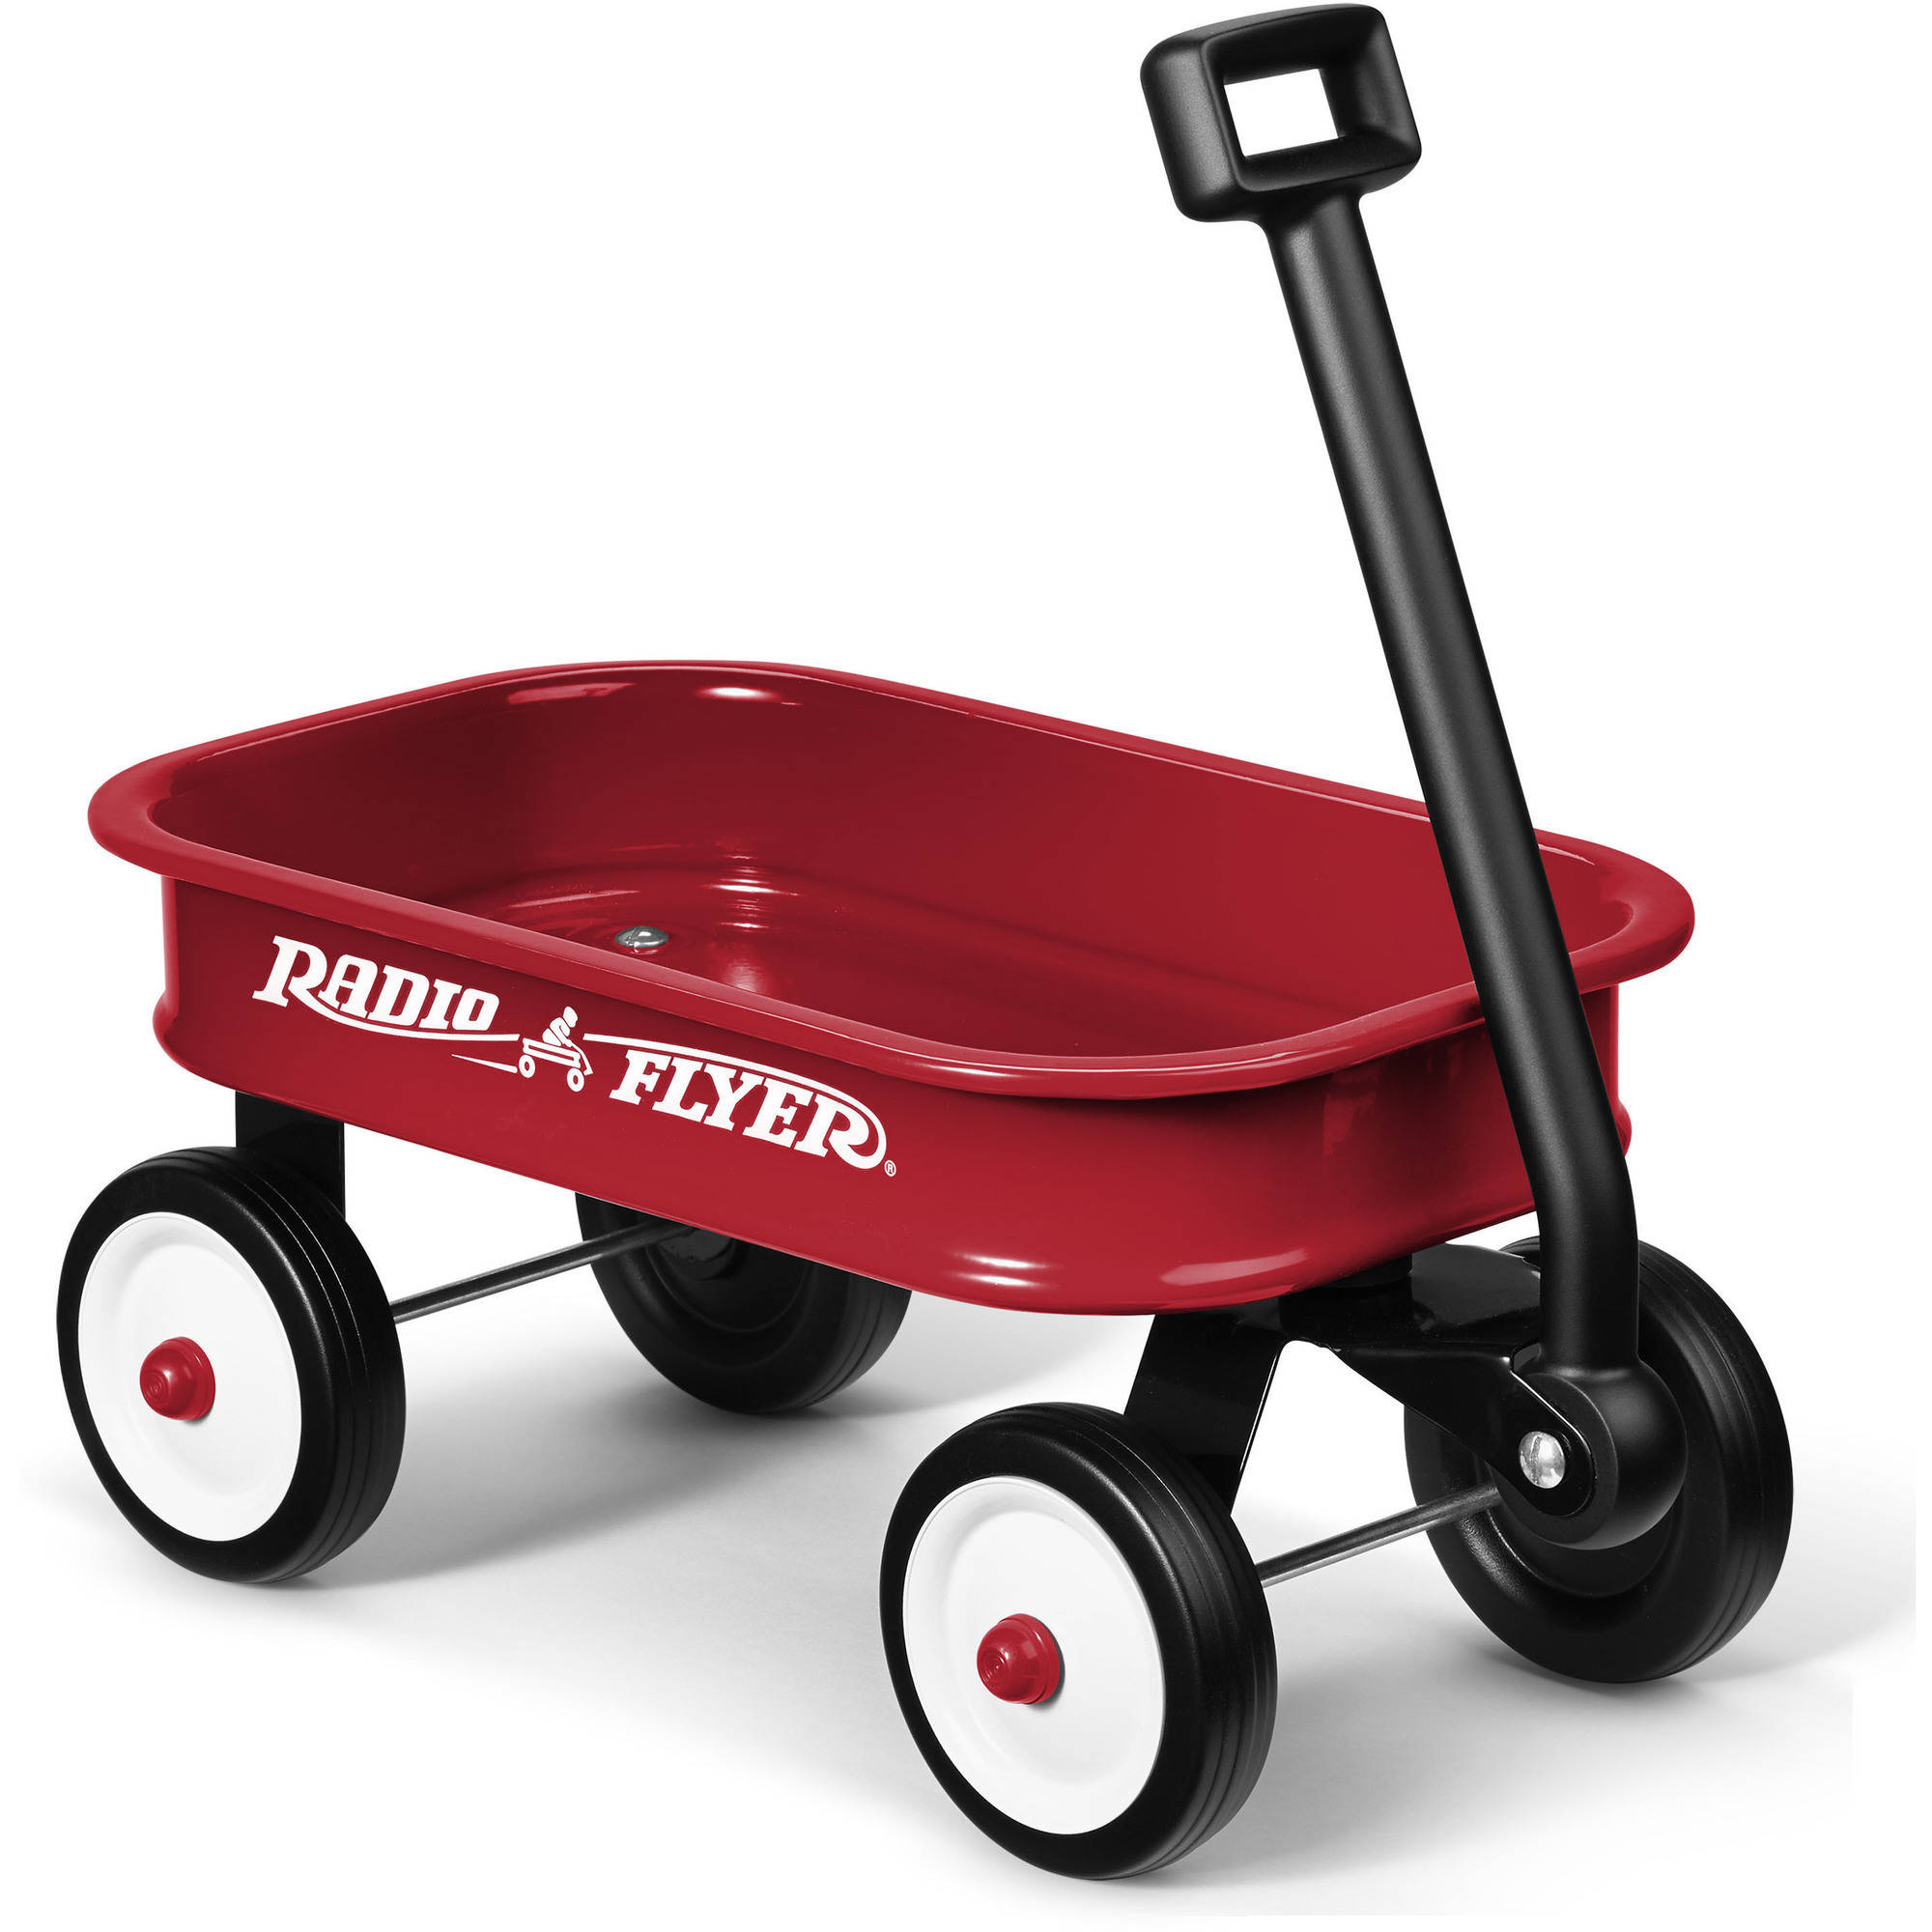 Radio Flyer, Little Red Toy Wagon (12.5" long x 5.7" tall), Miniature Wagon, Red - image 3 of 13